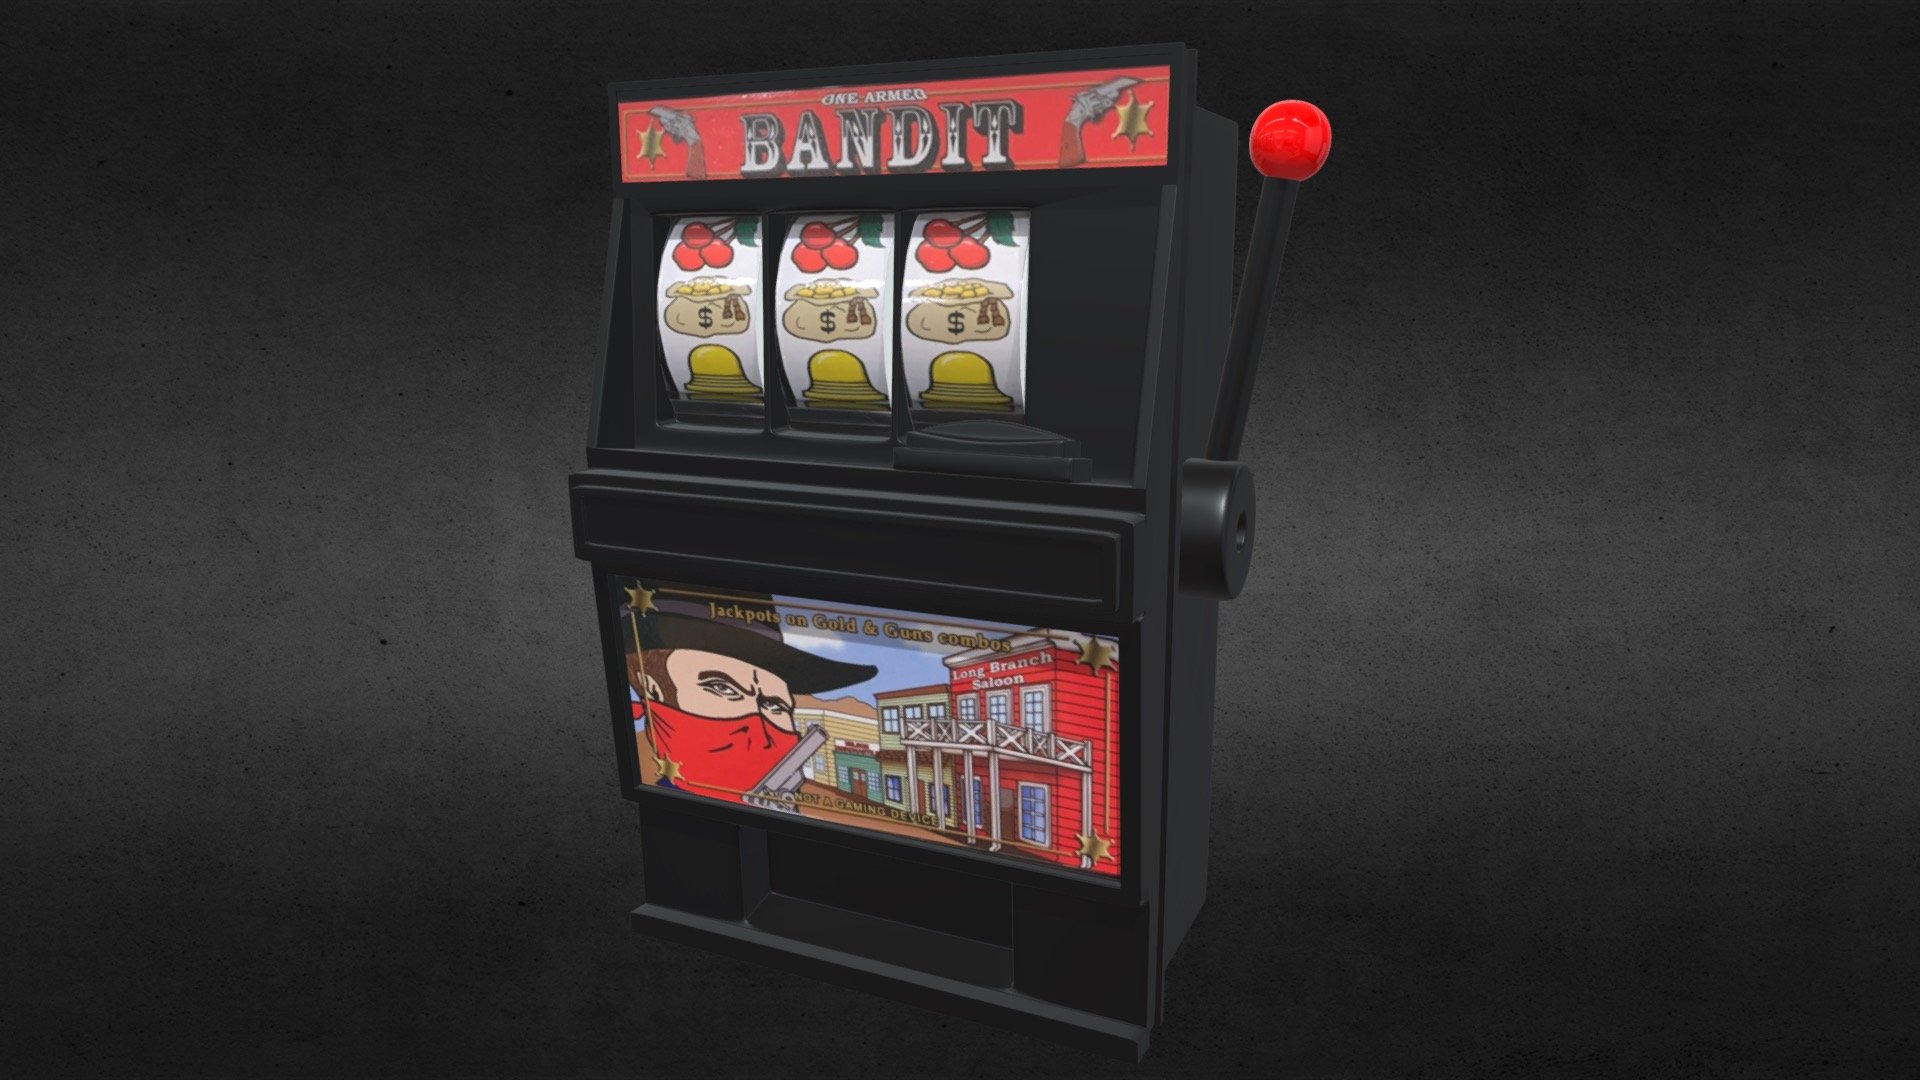 This is a Slot Machine that I will be working on for this month. I modeled it in Maya and will be bringing it into Substance Painter for texturing 3d model